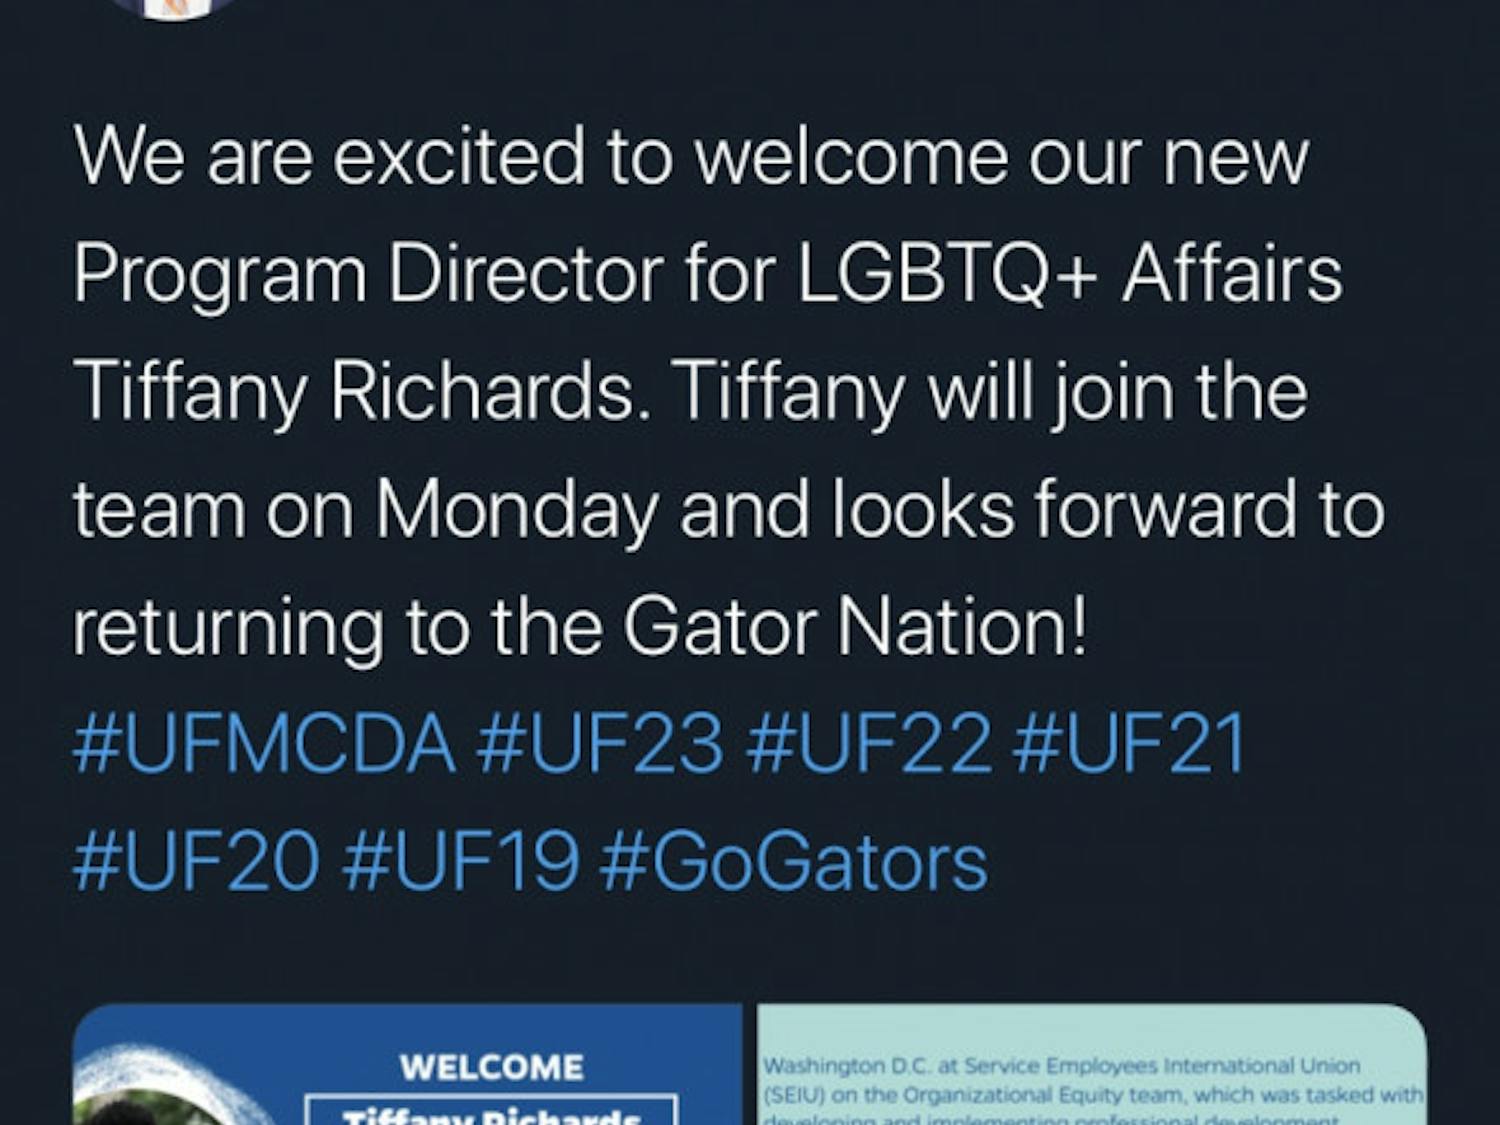 Will Atkins, associate dean of students and senior director of the Multicultural and Diversity Affairs department at UF, announced Friday the hiring of Tiffany Richards, the new program director for LGBTQ+ Affairs, on Twitter.